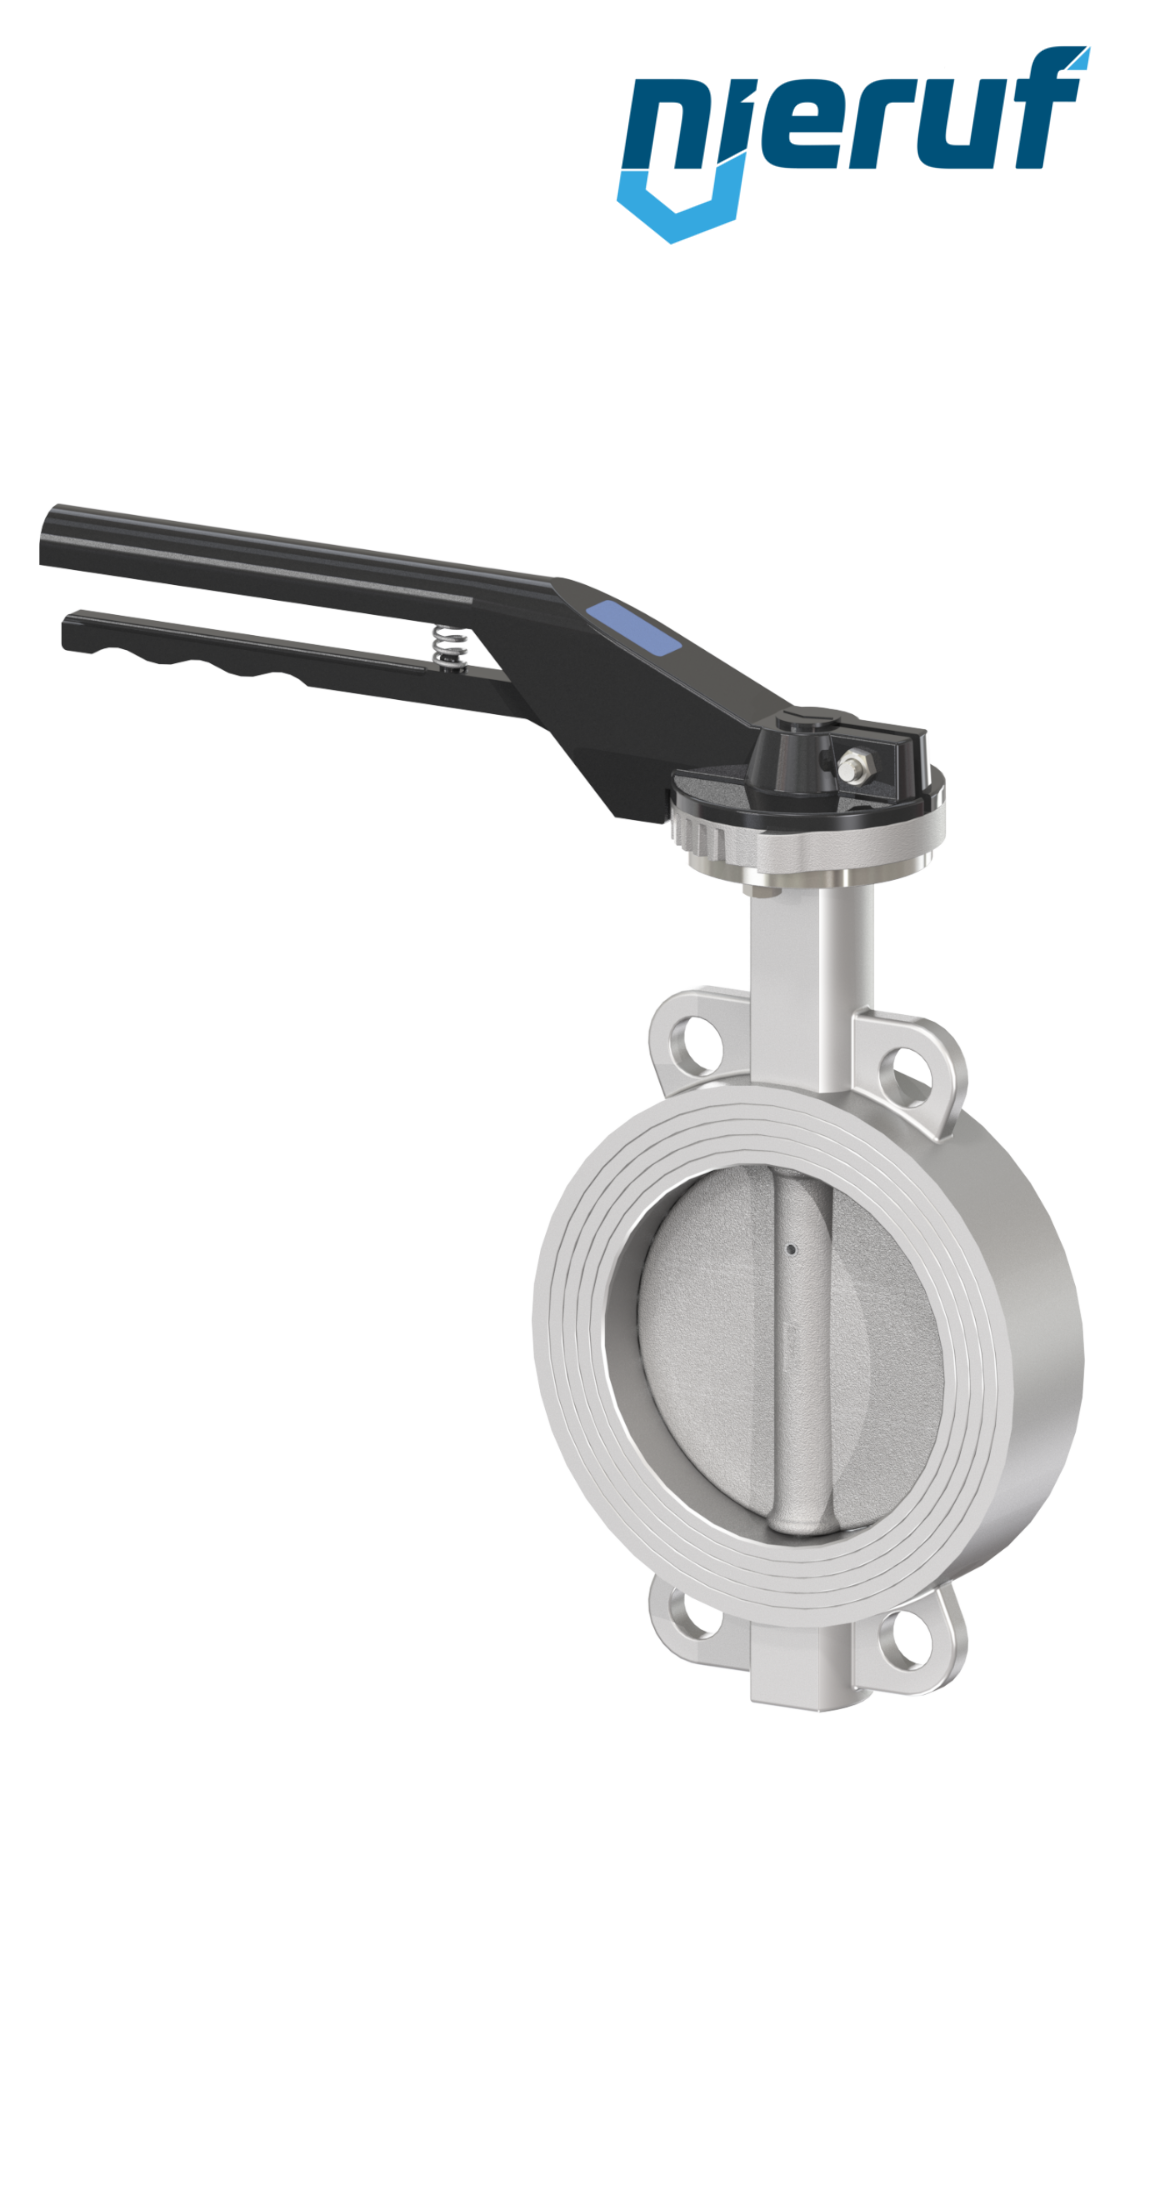 Butterfly-valve-stainless-steel DN 65 PN16 AK08 metall notch lever